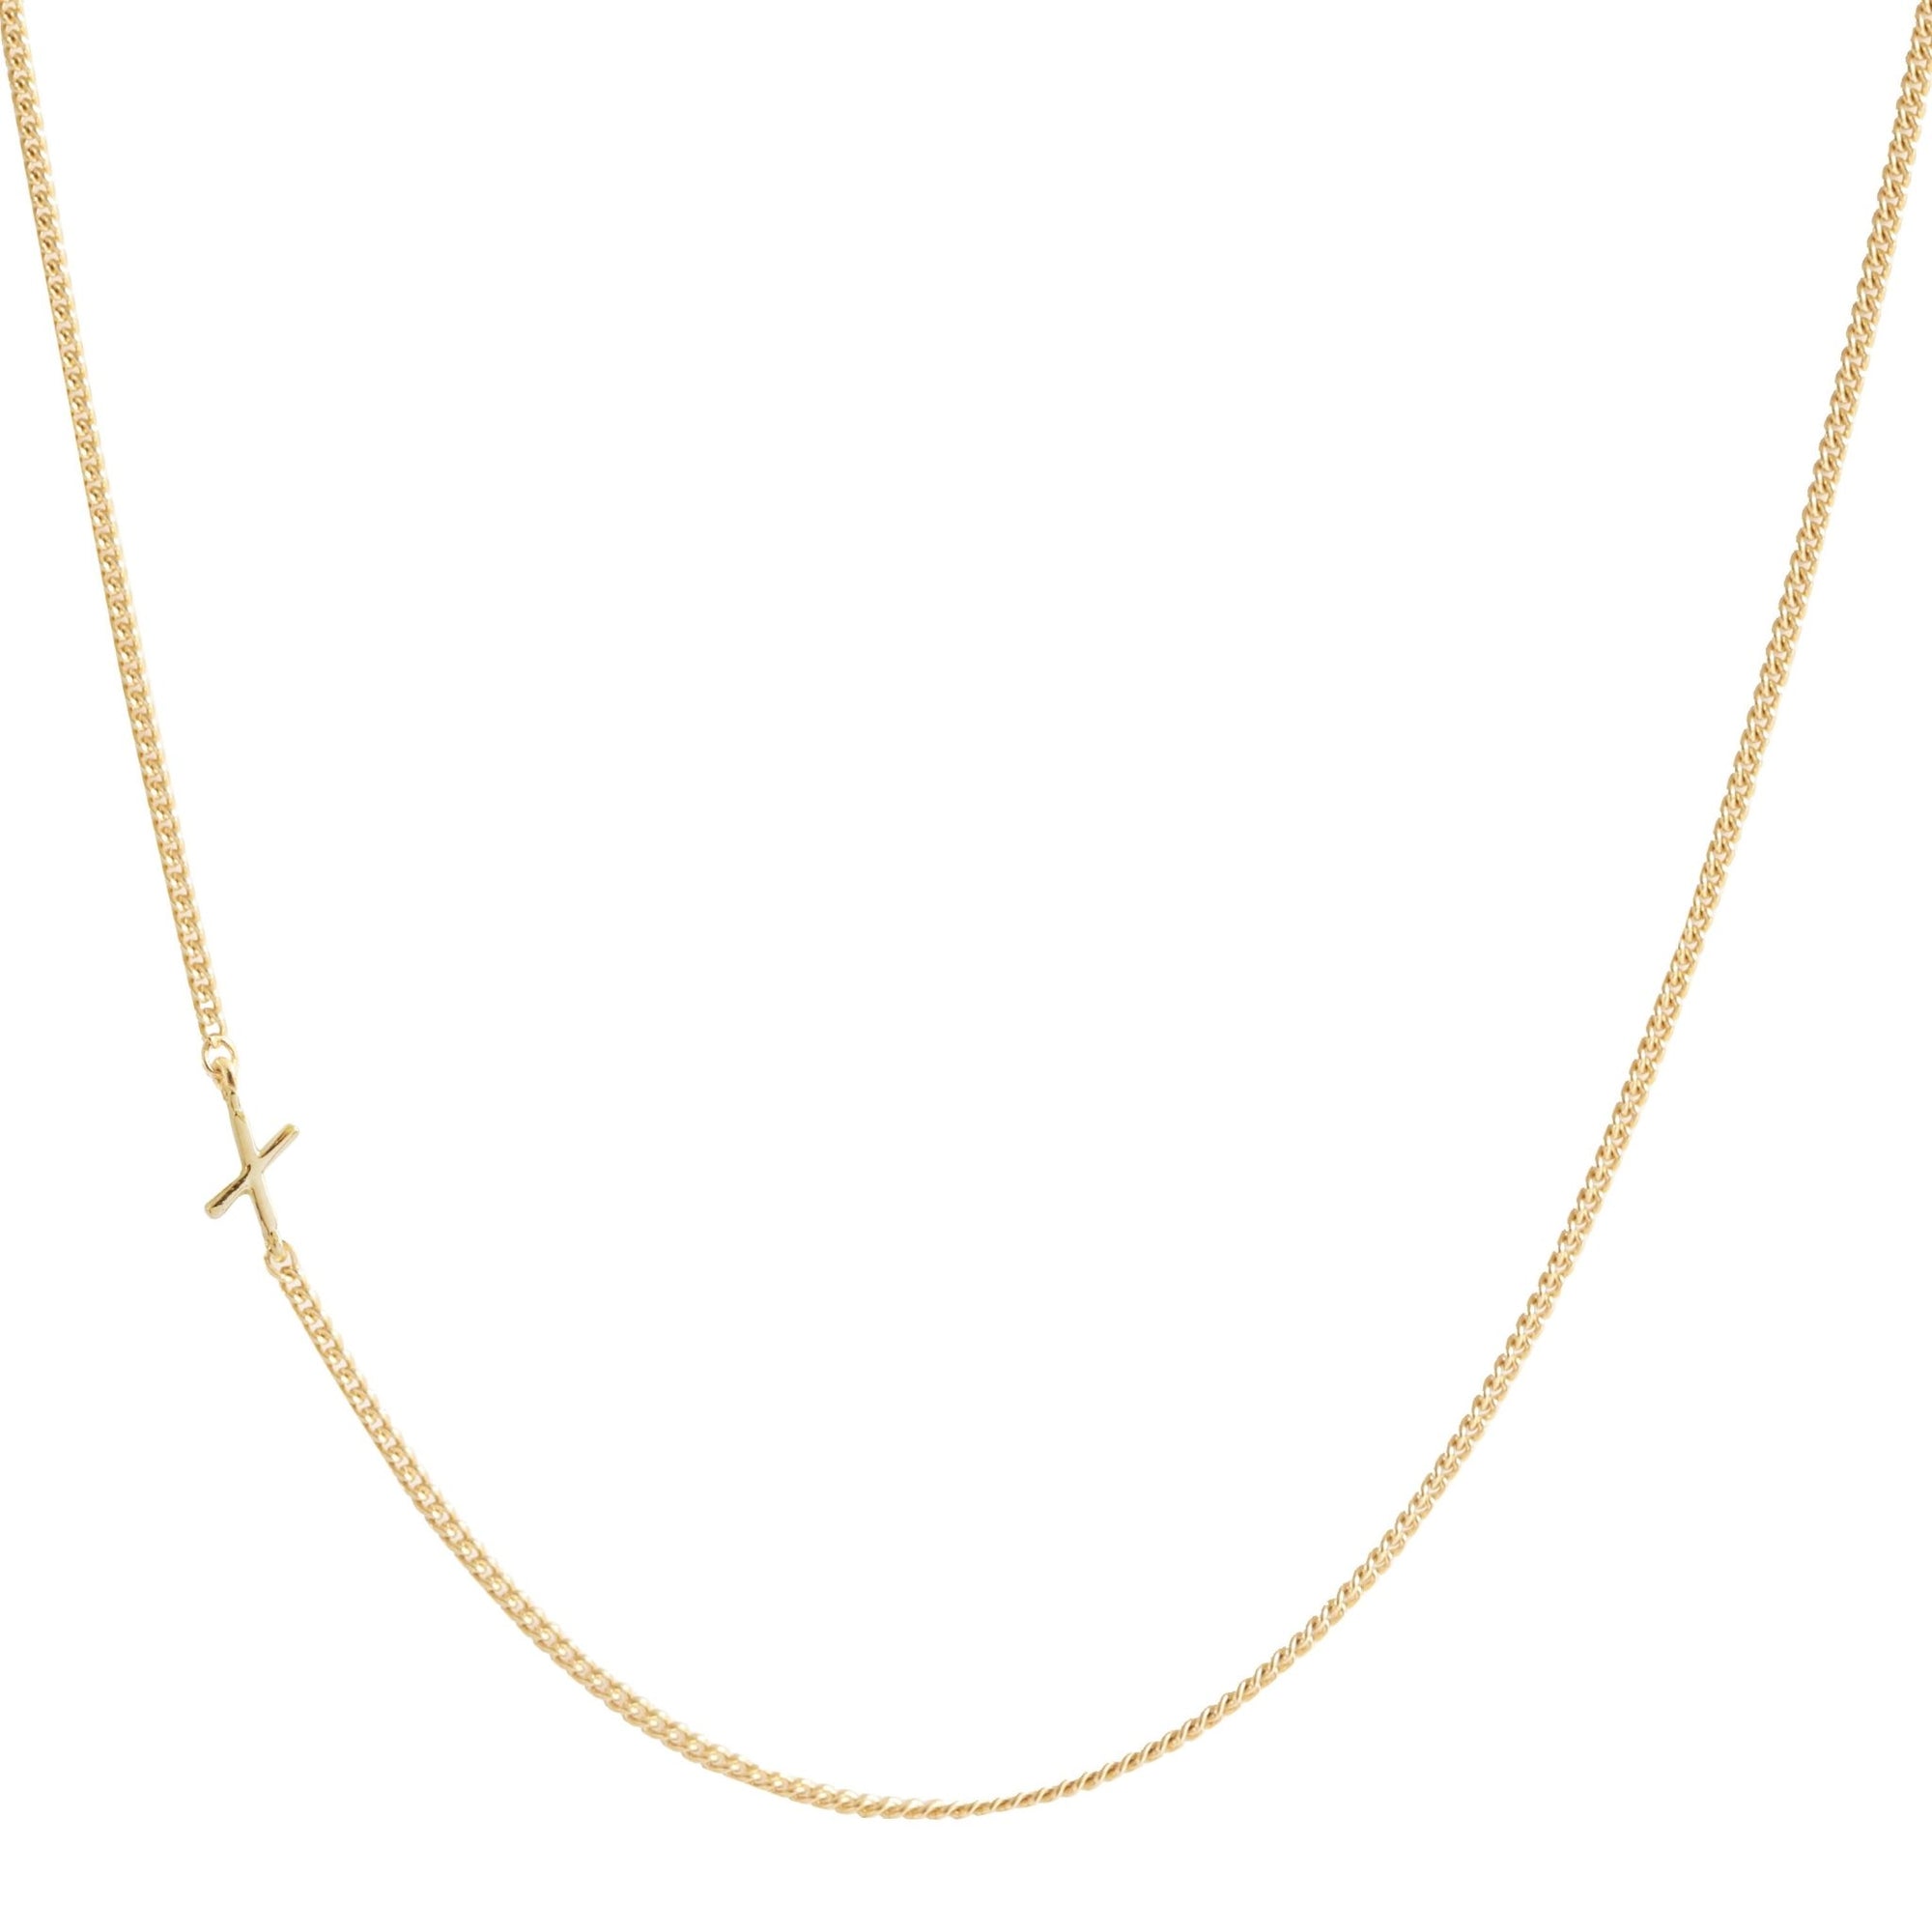 NOTABLE OFFSET INITIAL NECKLACE - X - GOLD - SO PRETTY CARA COTTER